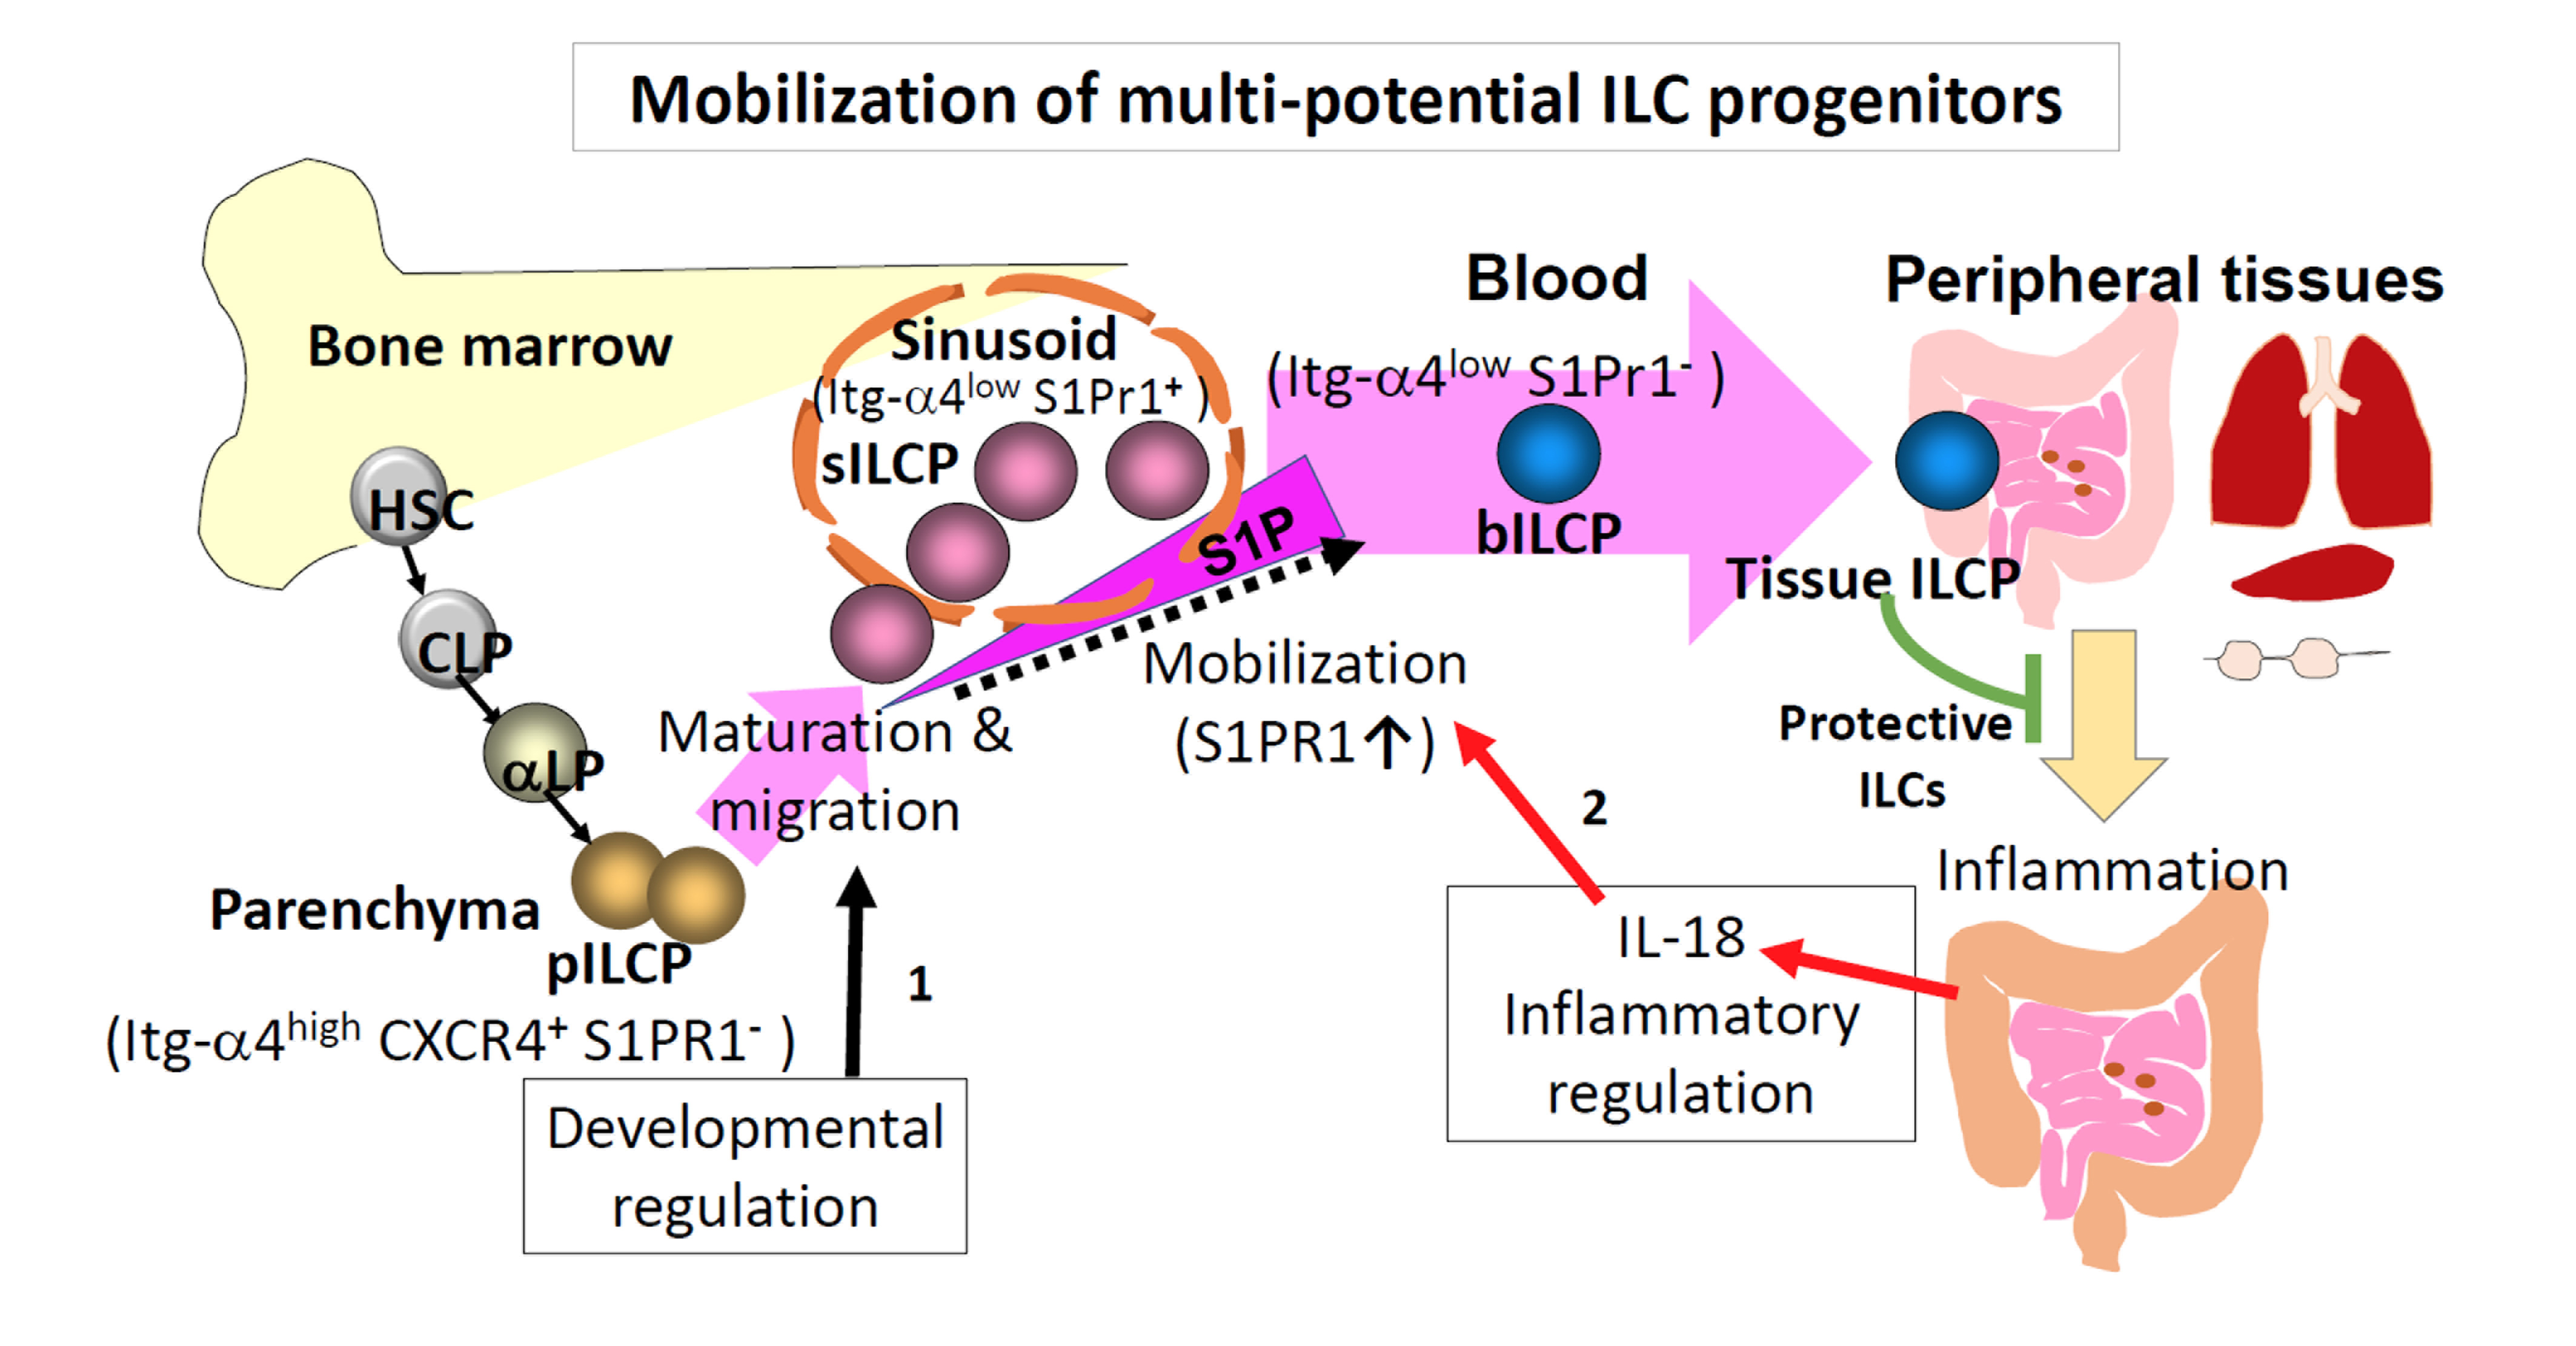 Parenchyma progenitors (pILCPs) are developed from early lymphoid progenitors in the bone marrow. These cells become sinusoid progenitors (sILCPs), which emigrate the marrow to become blood ILCPs (bILCPs). bILCPs enter peripheral tissues to generate mature ILCs that protect tissues. These processes require orchestrated expression of trafficking molecules (integrins, CXCR4, and S1P receptors), which are regulated by internal and external cues such as the inflammatory signal IL-18.